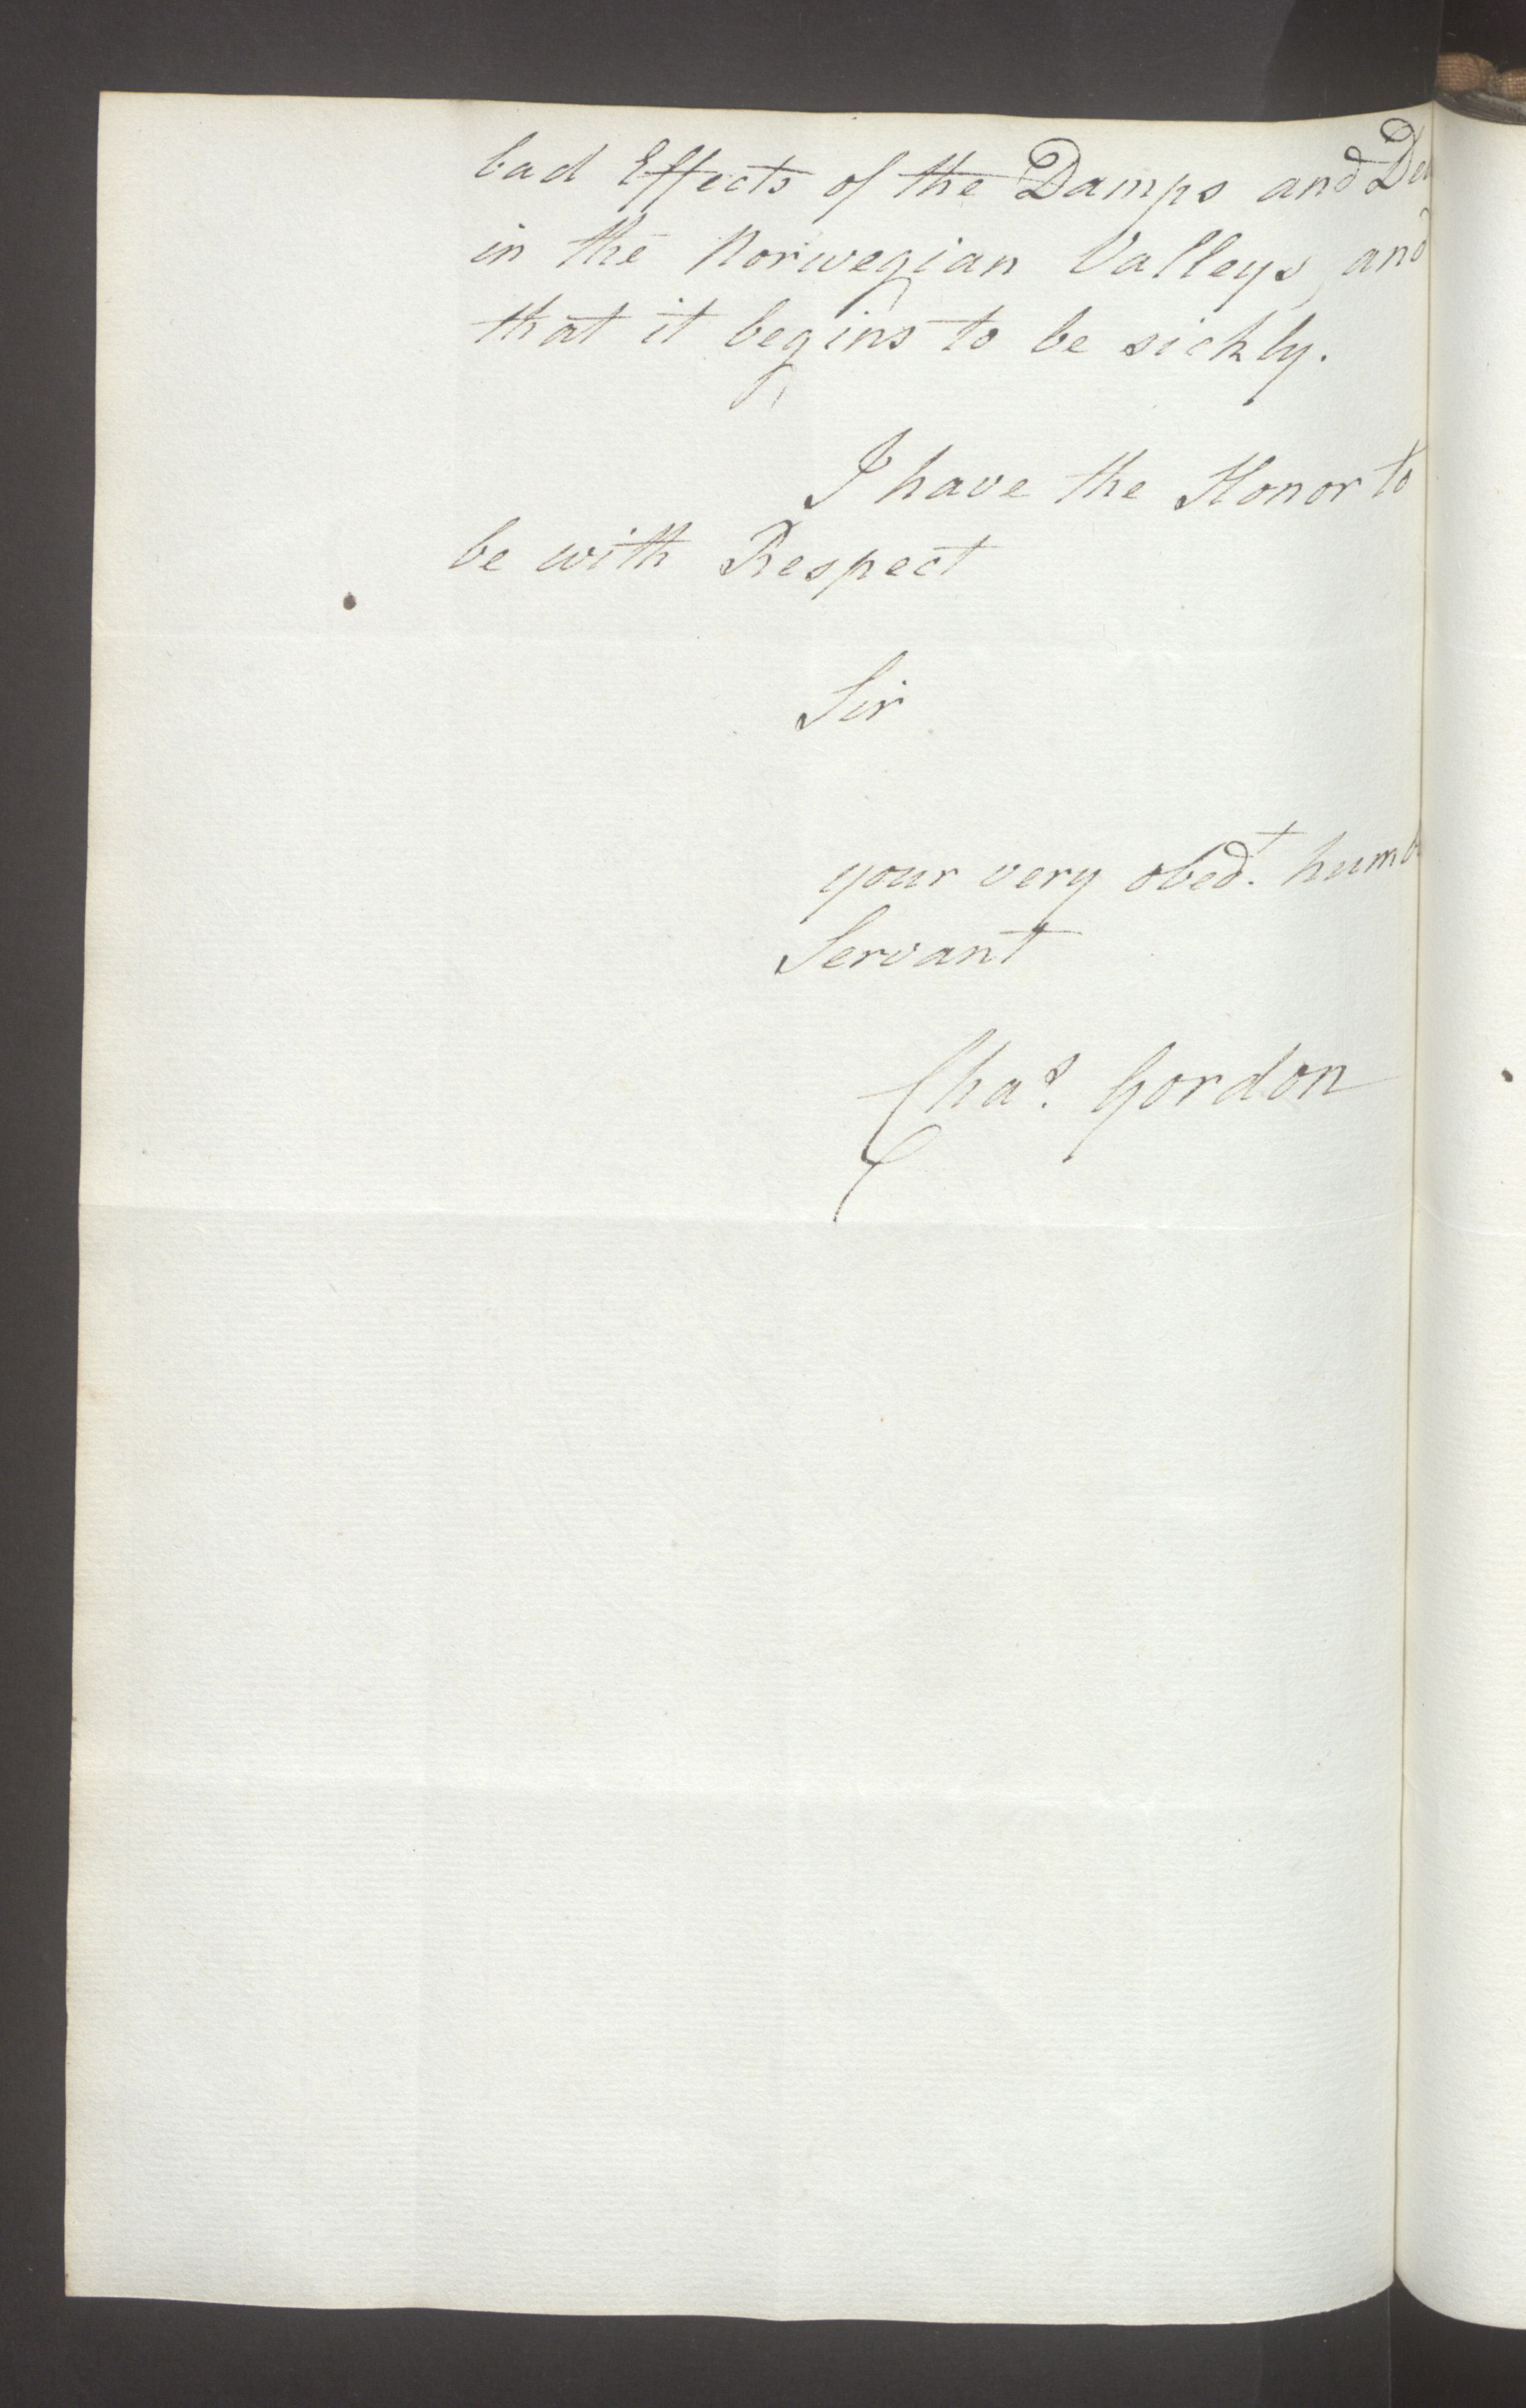 Foreign Office*, UKA/-/FO 38/16: Sir C. Gordon. Reports from Malmö, Jonkoping, and Helsingborg, 1814, p. 84